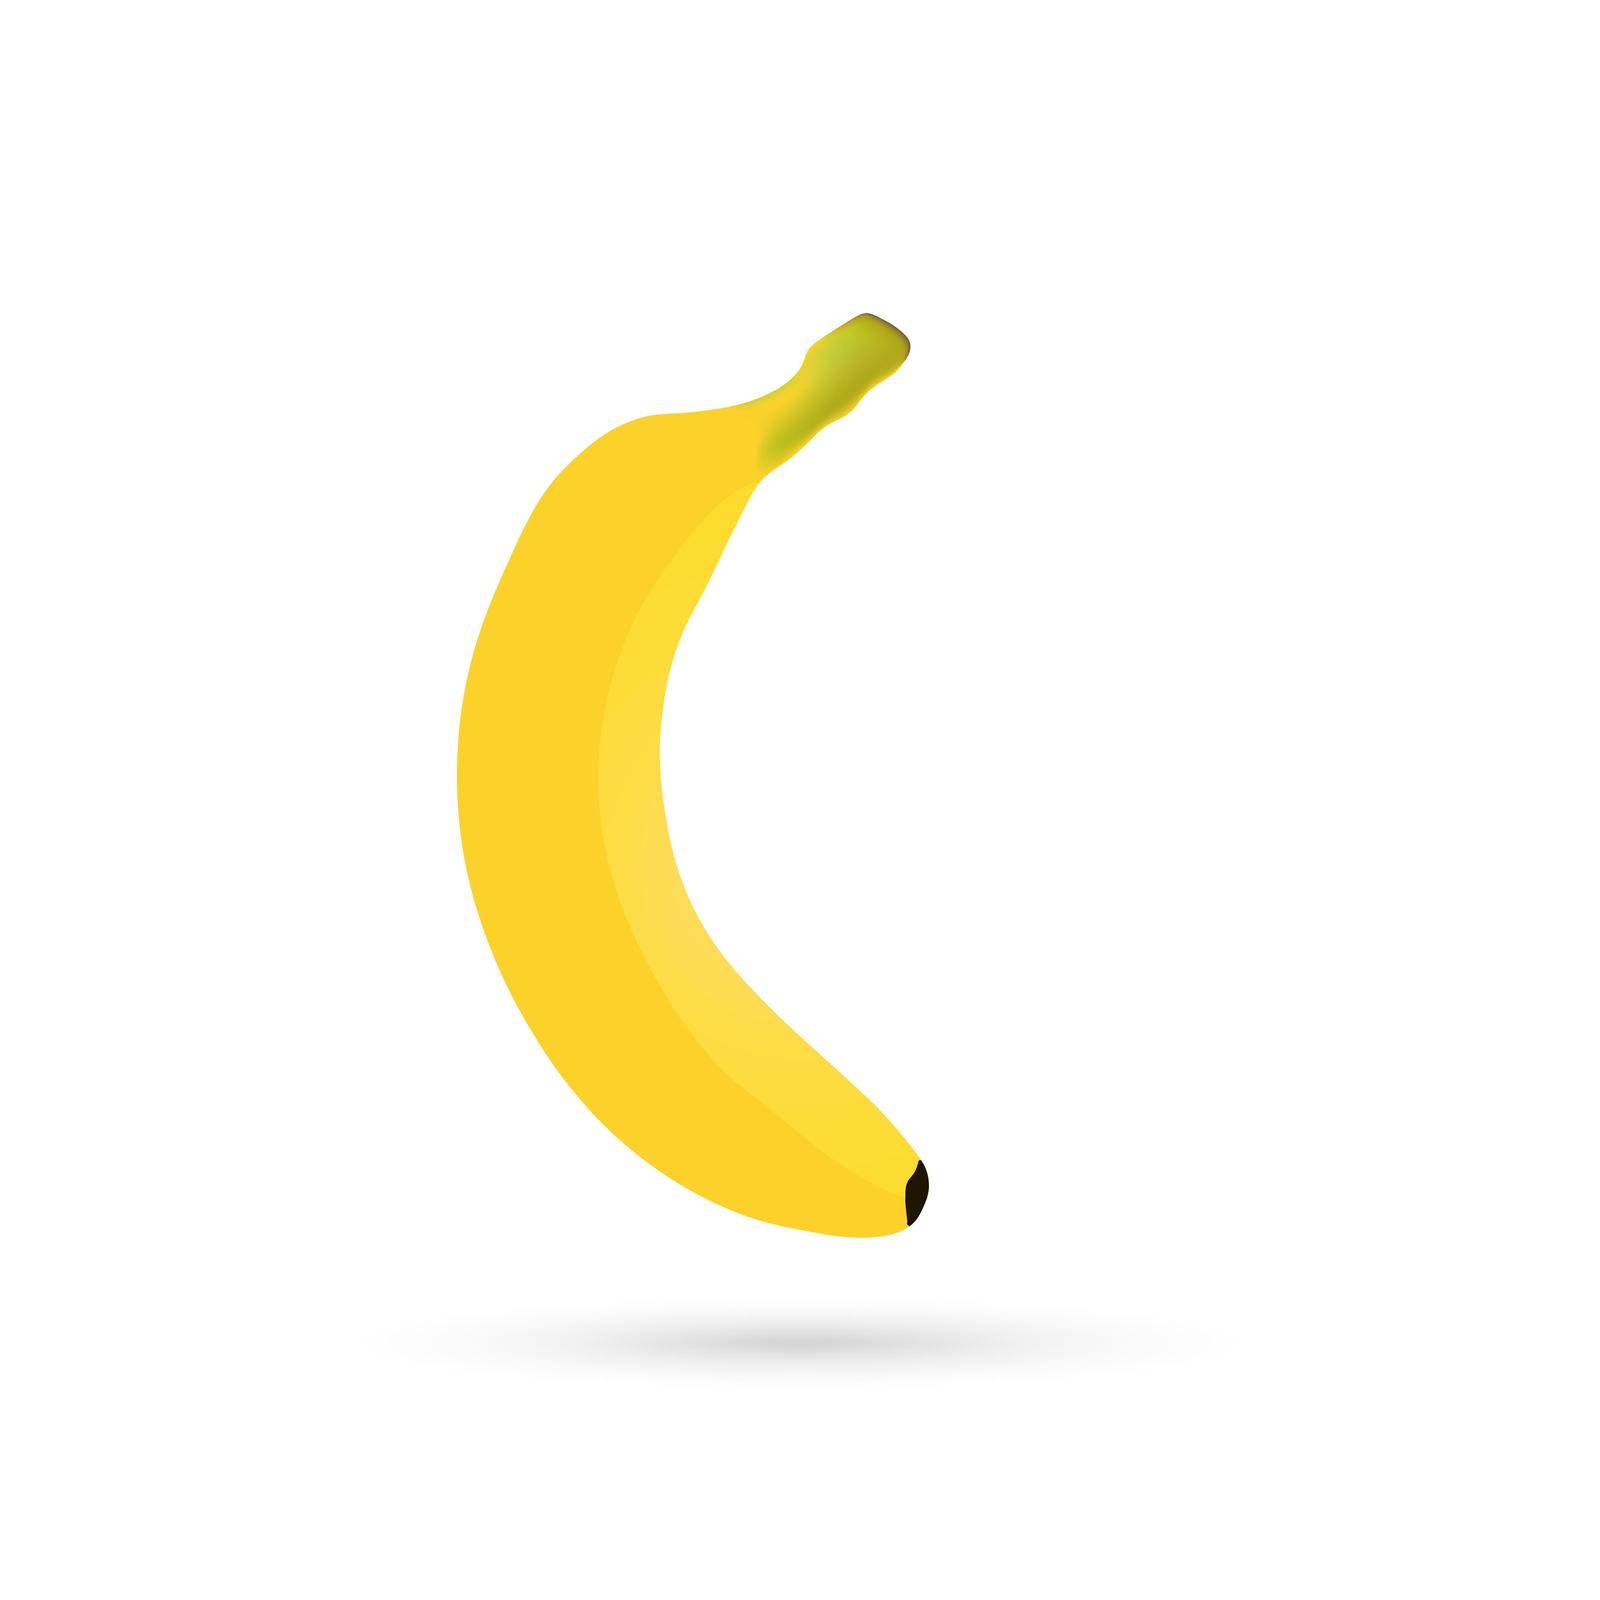 Banana icon with shadow by misteremil